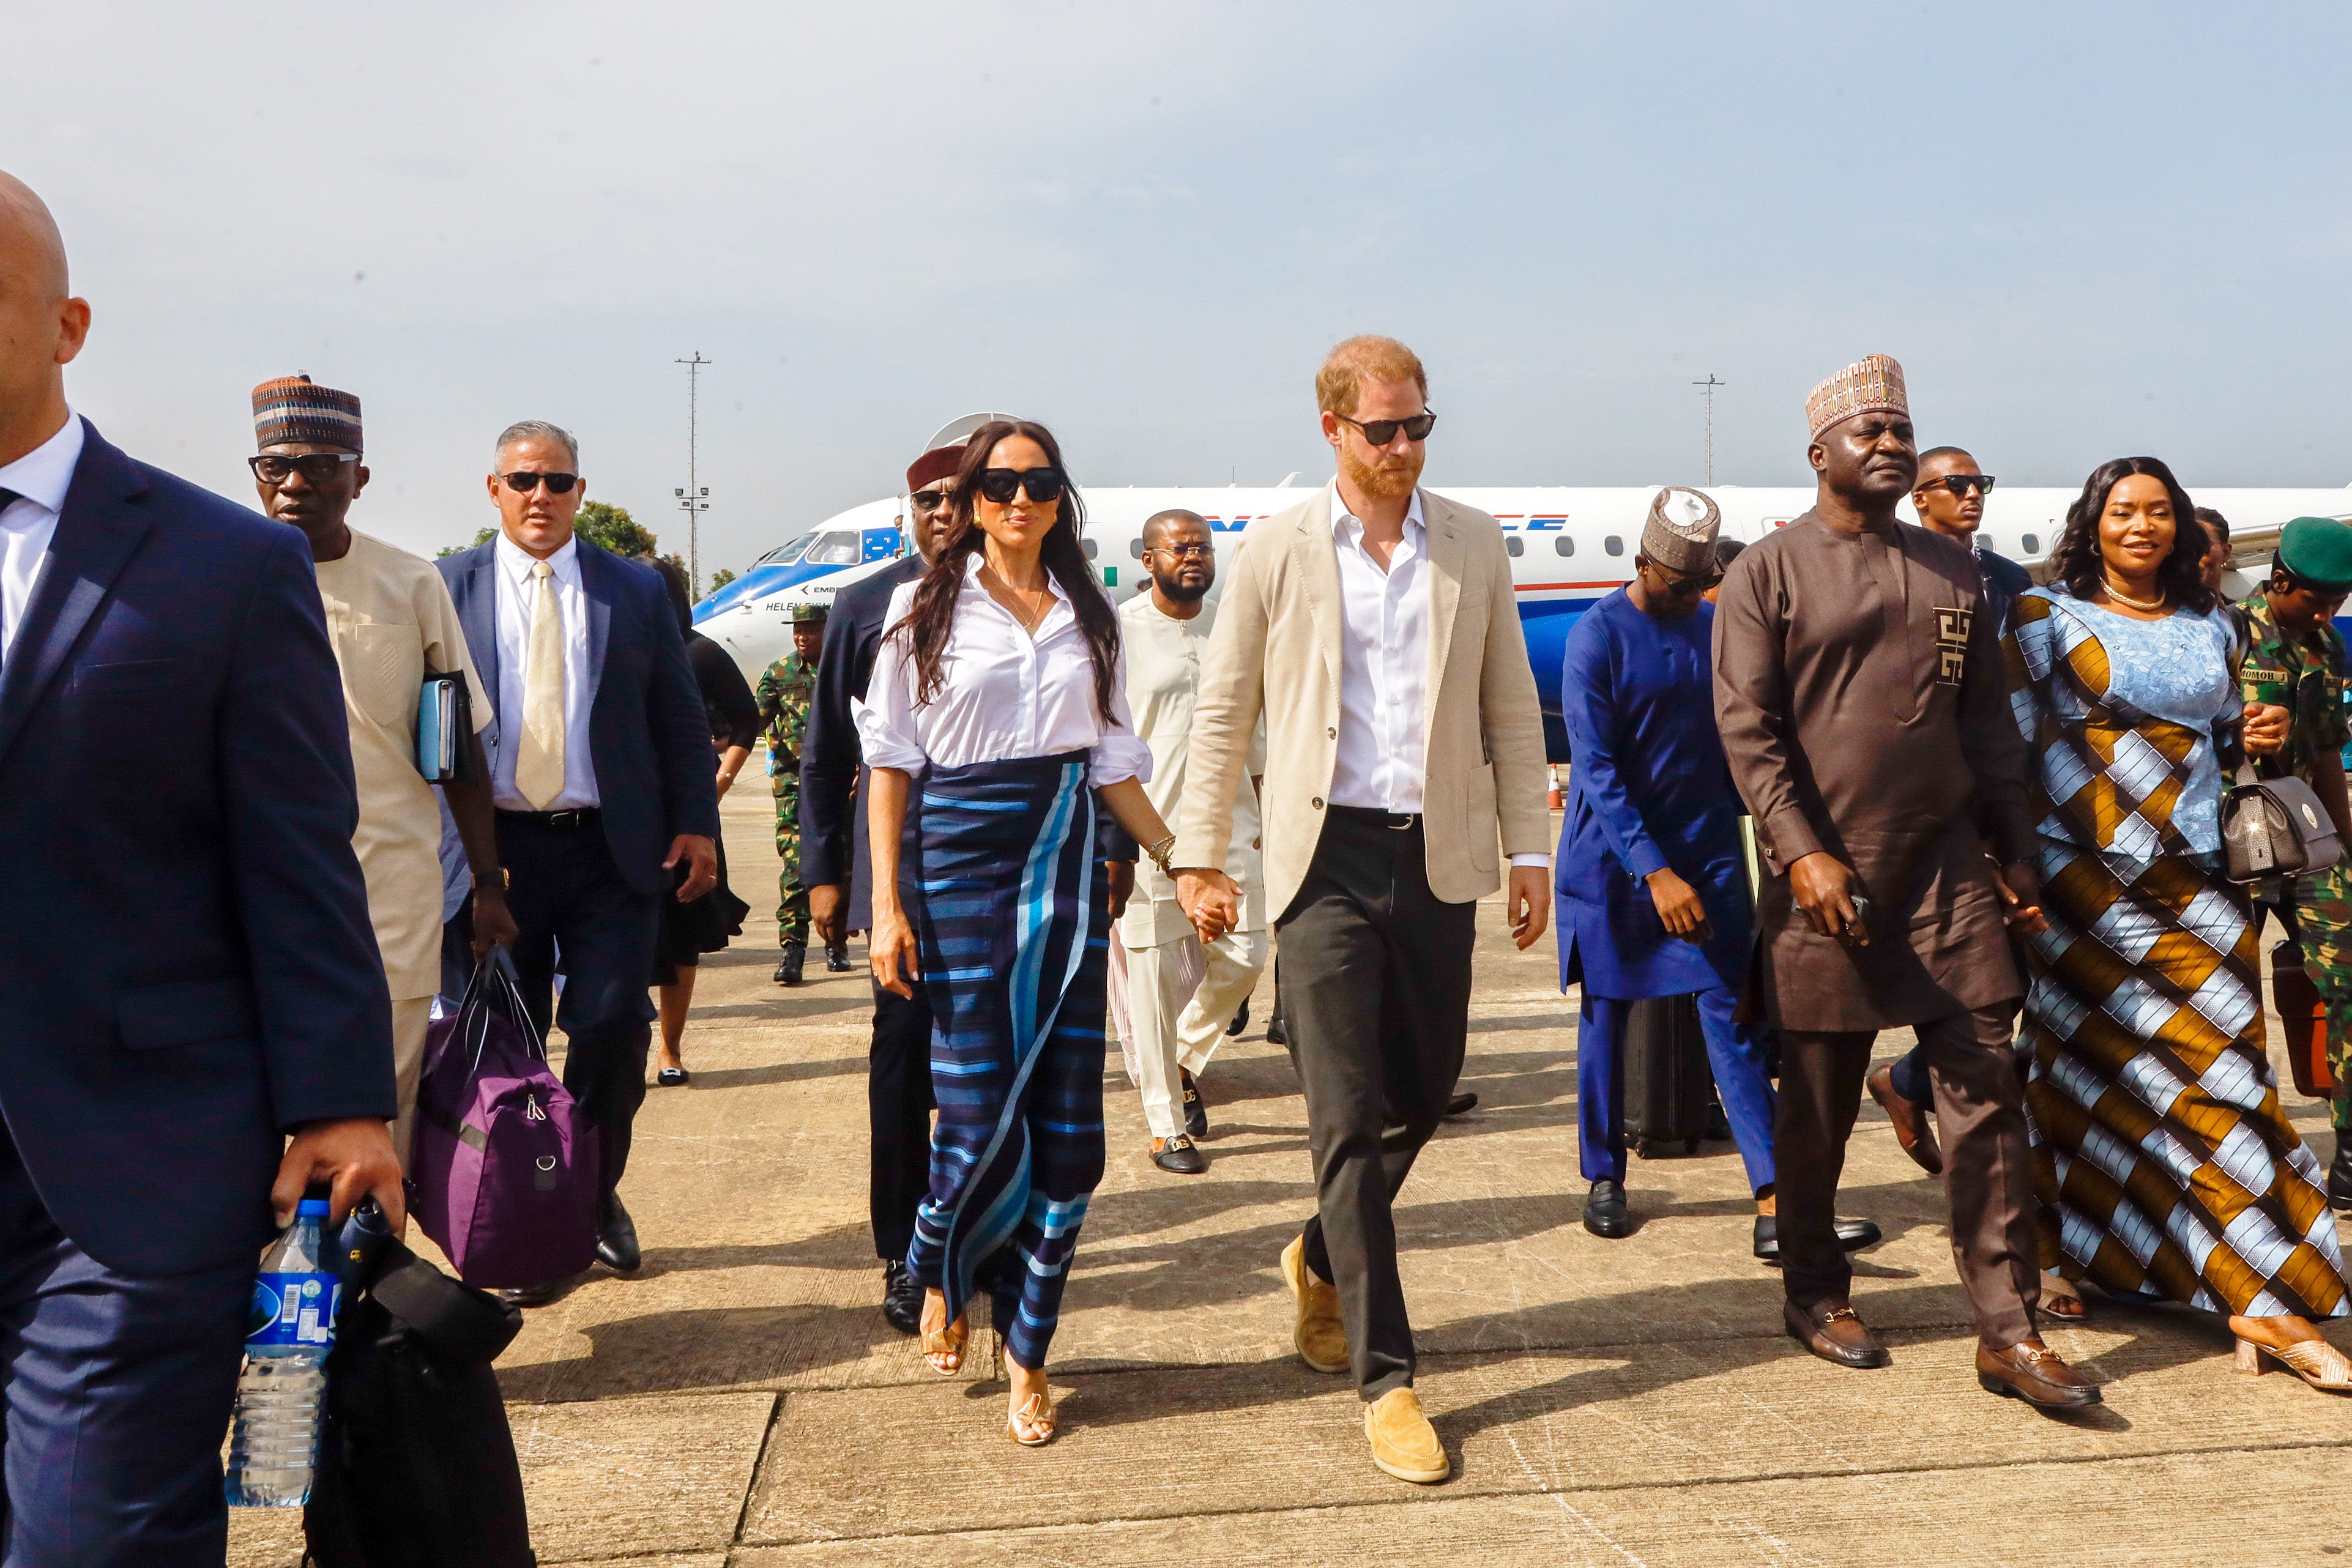 Meghan Markle also visited Malta to explore her ancestry